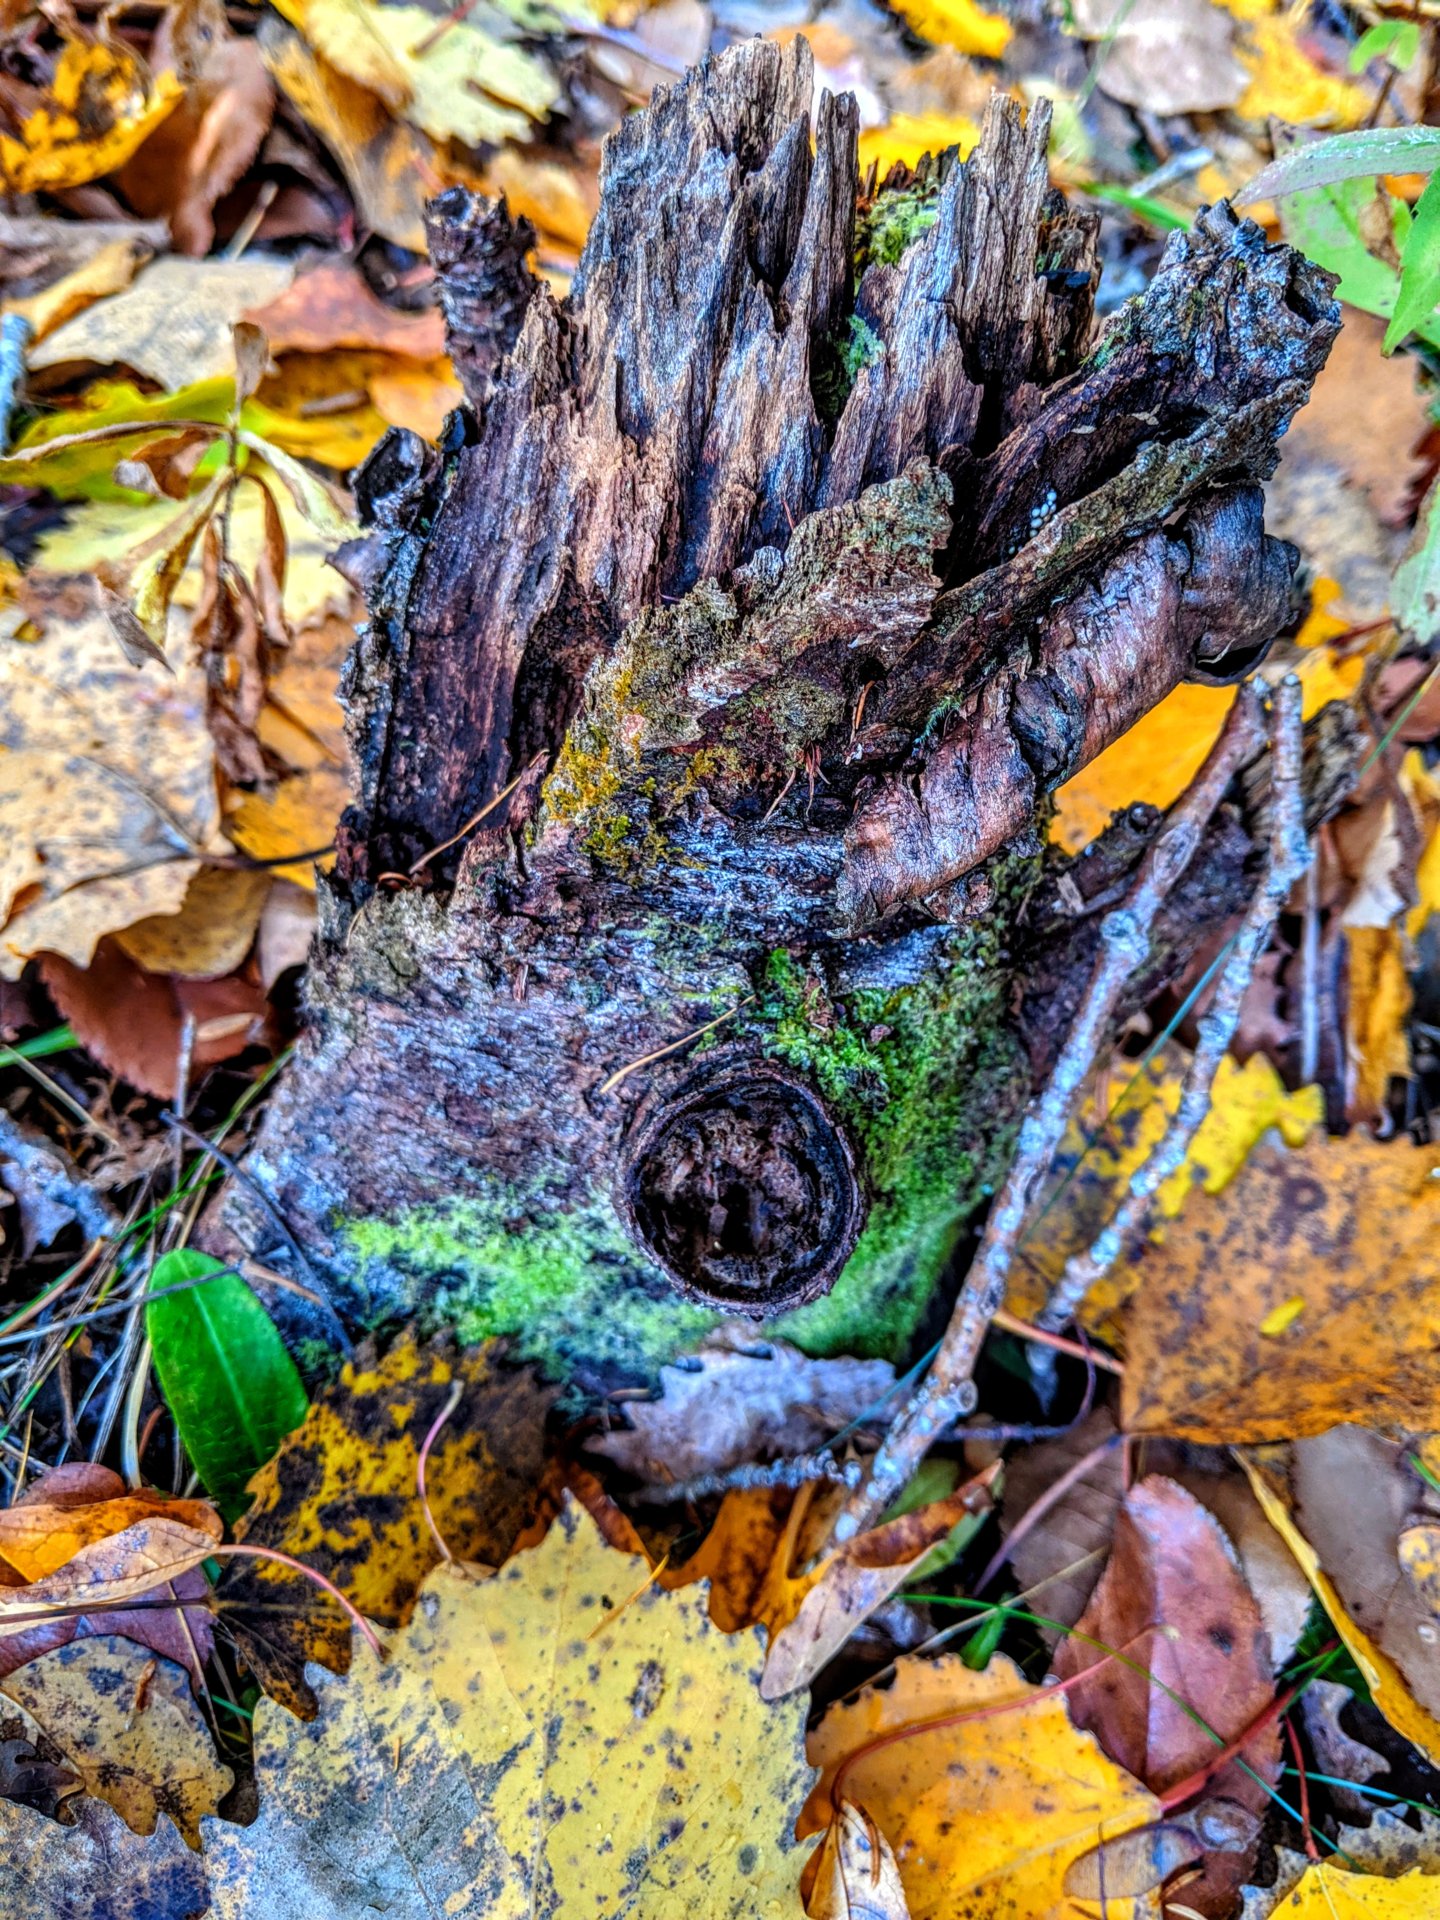 oct 2019 Perry Maine, old log in ground around yellow and brown leave with a round mark